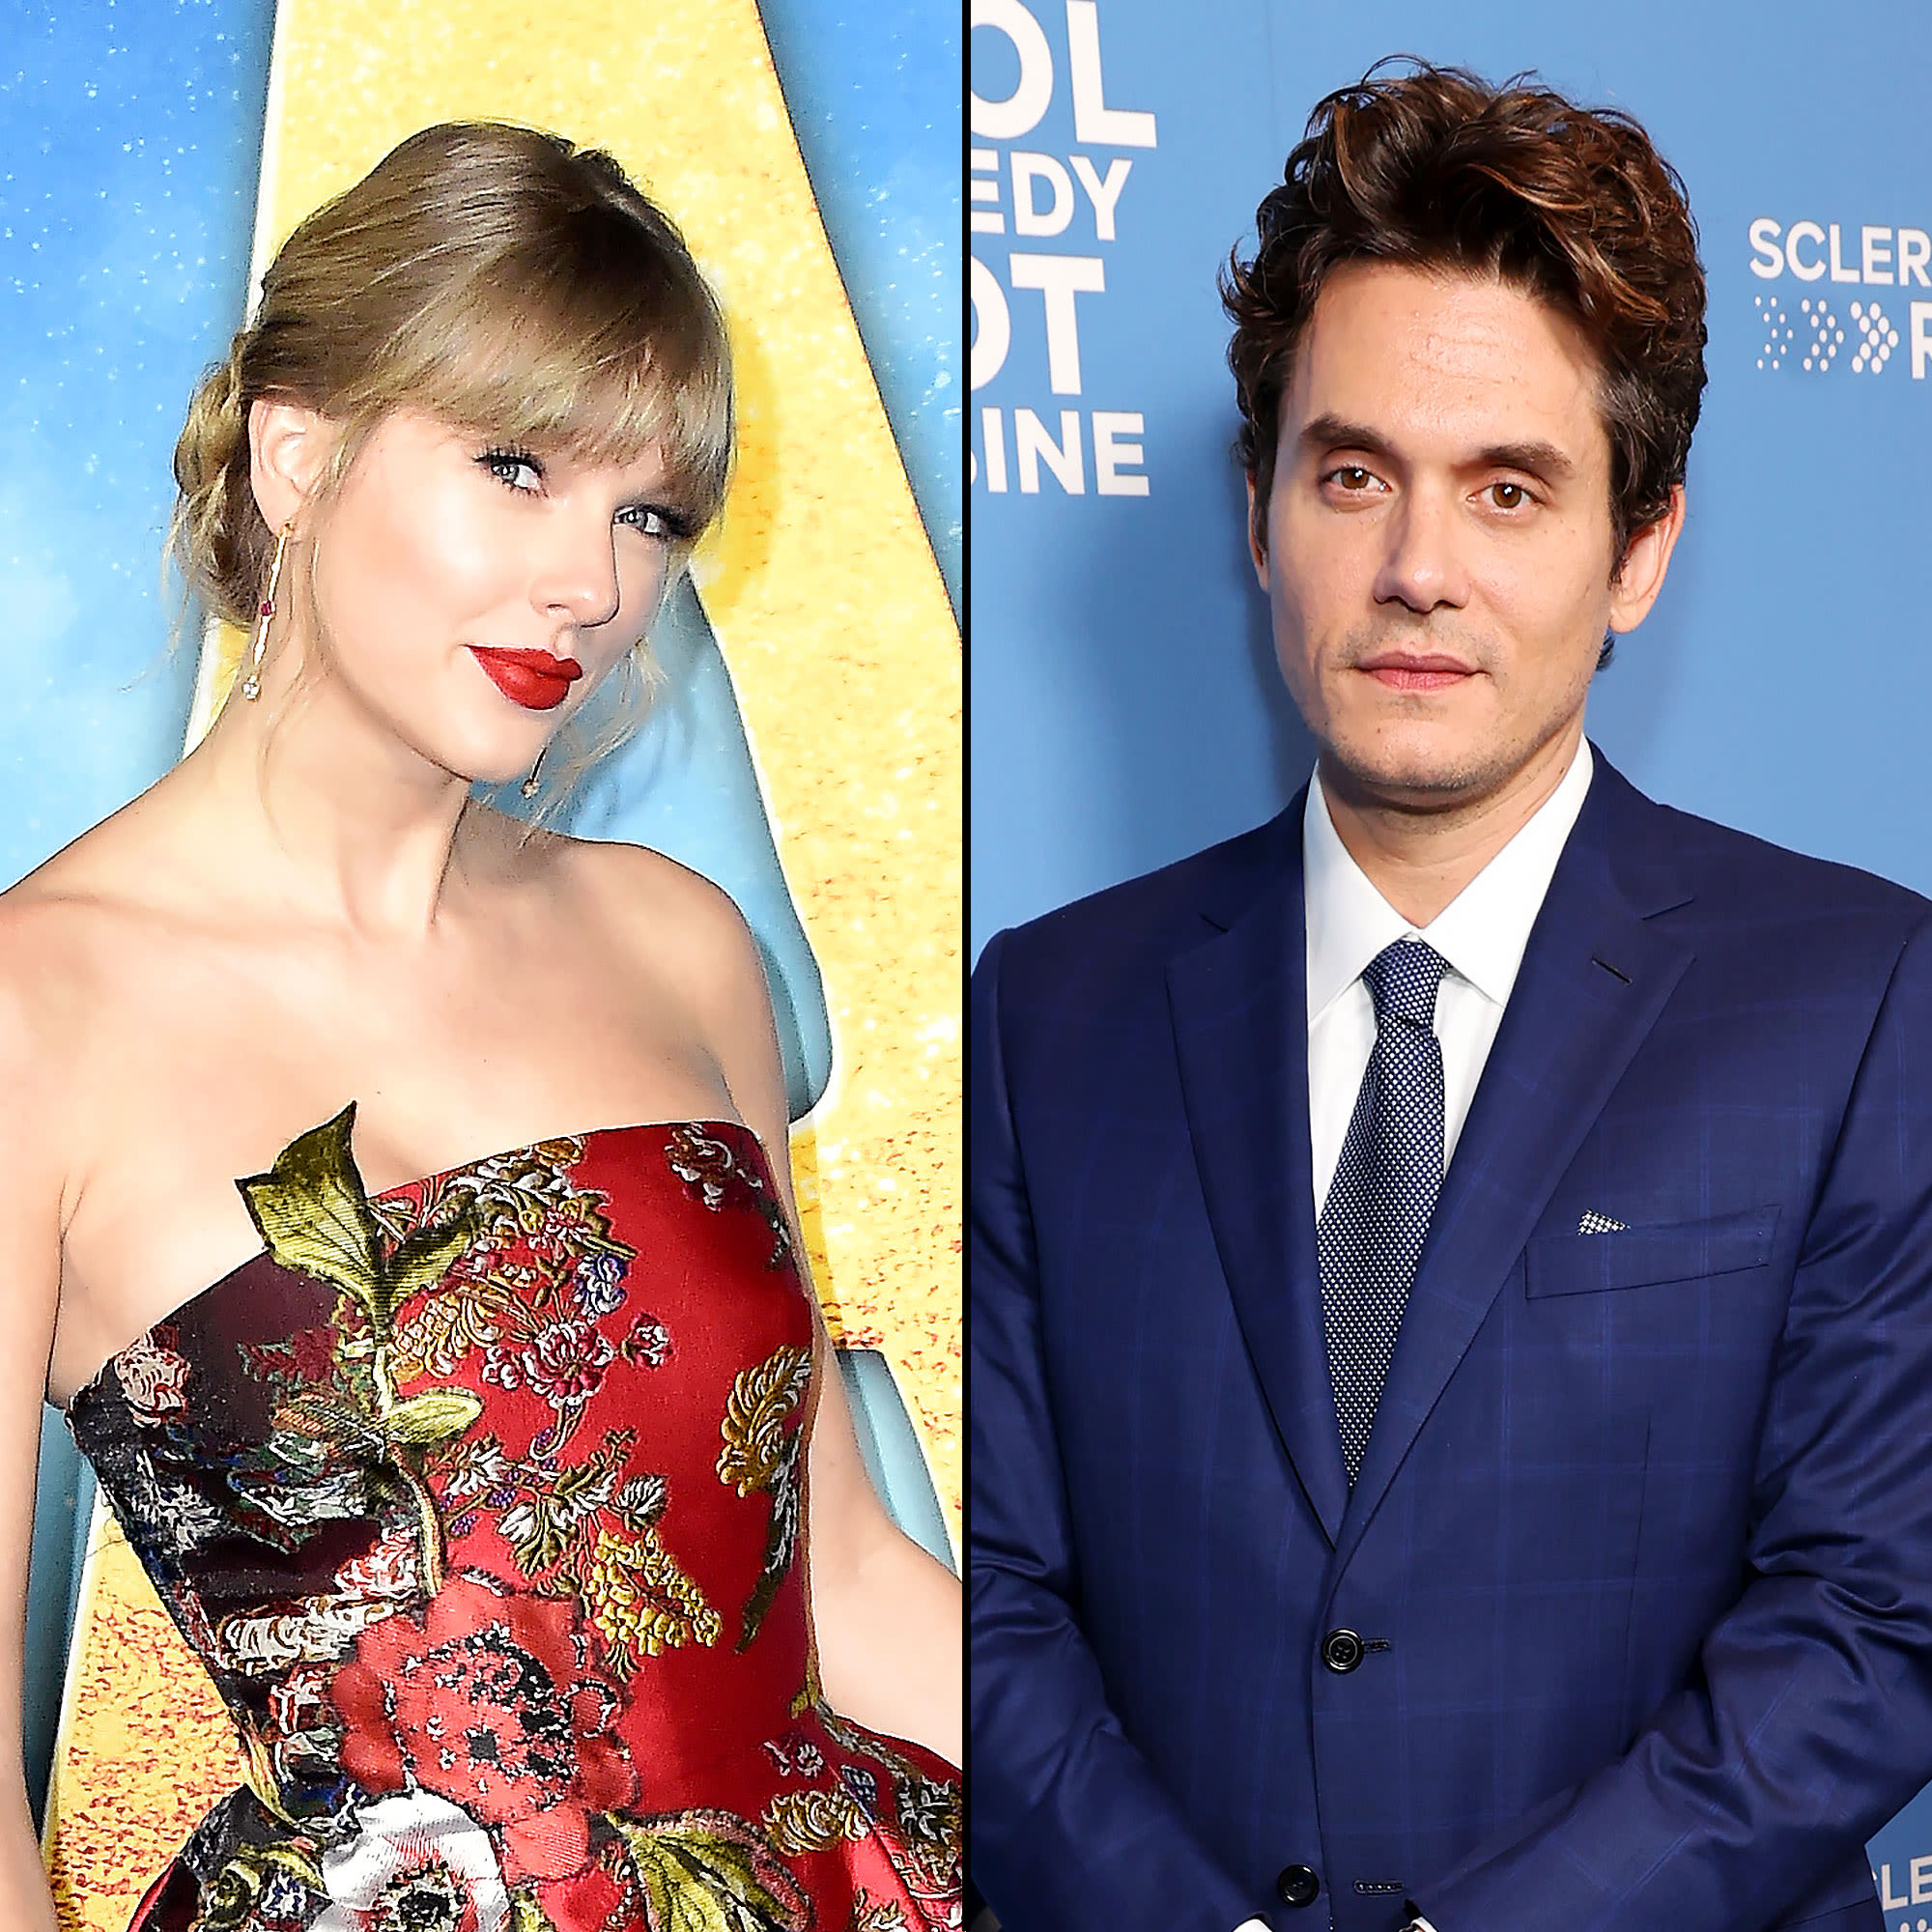 Did Taylor Swift Write TTPD’s ‘The Manuscript’ About Ex John Mayer? All the Clues in the Lyrics